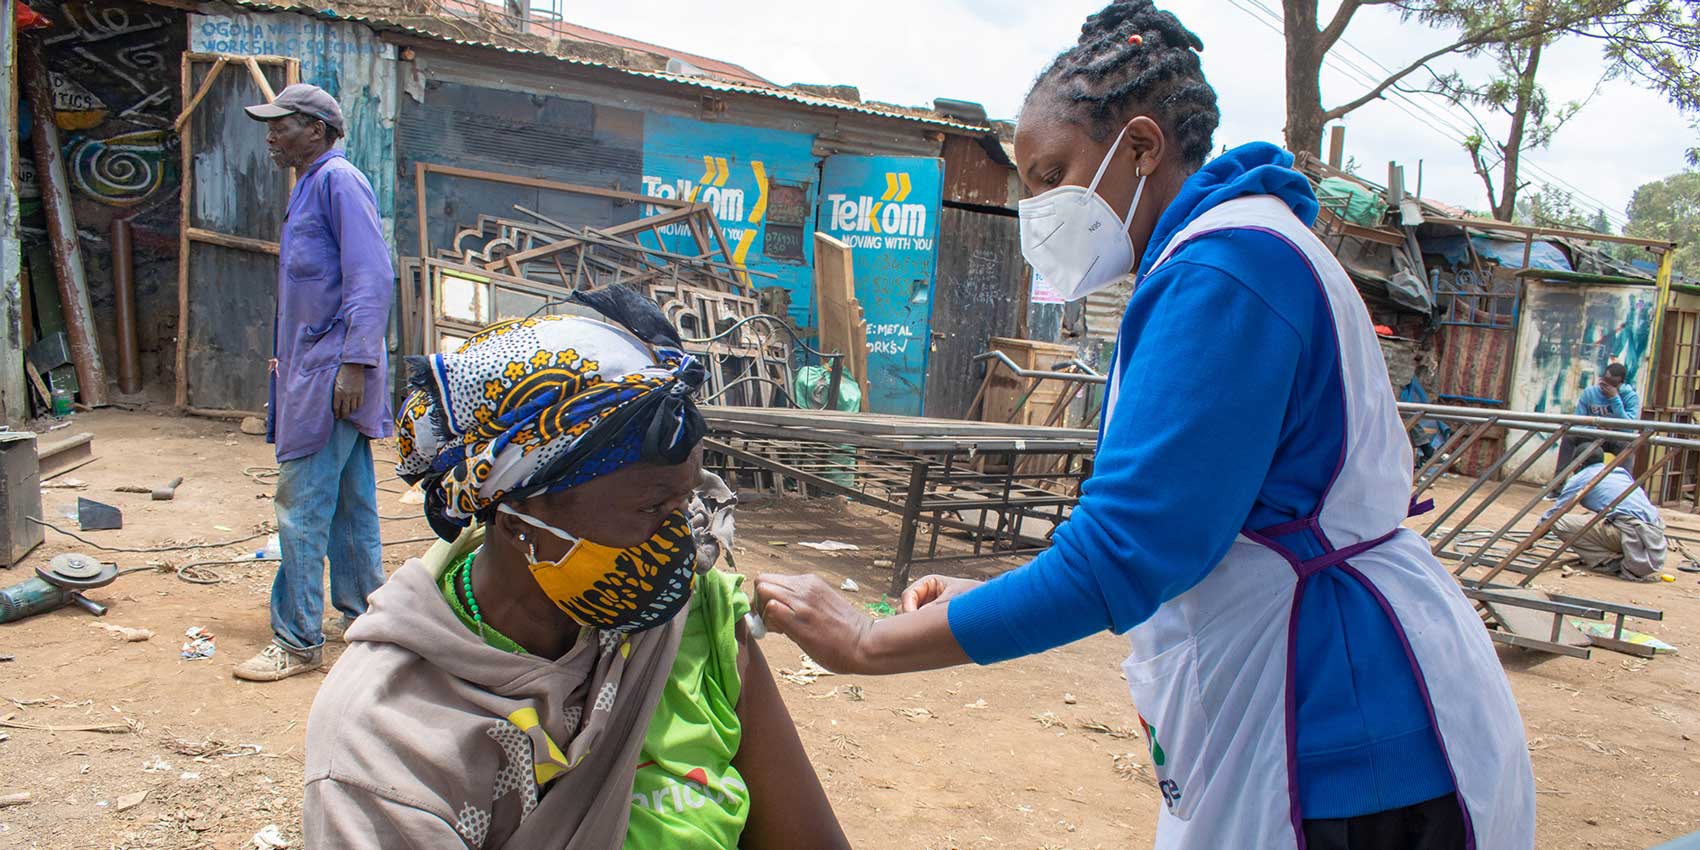 A SHOFCO health worker administering COVID-19 vaccines in Kibra slum during a mass vaccination exercise. Photo courtesy of SHOFCO